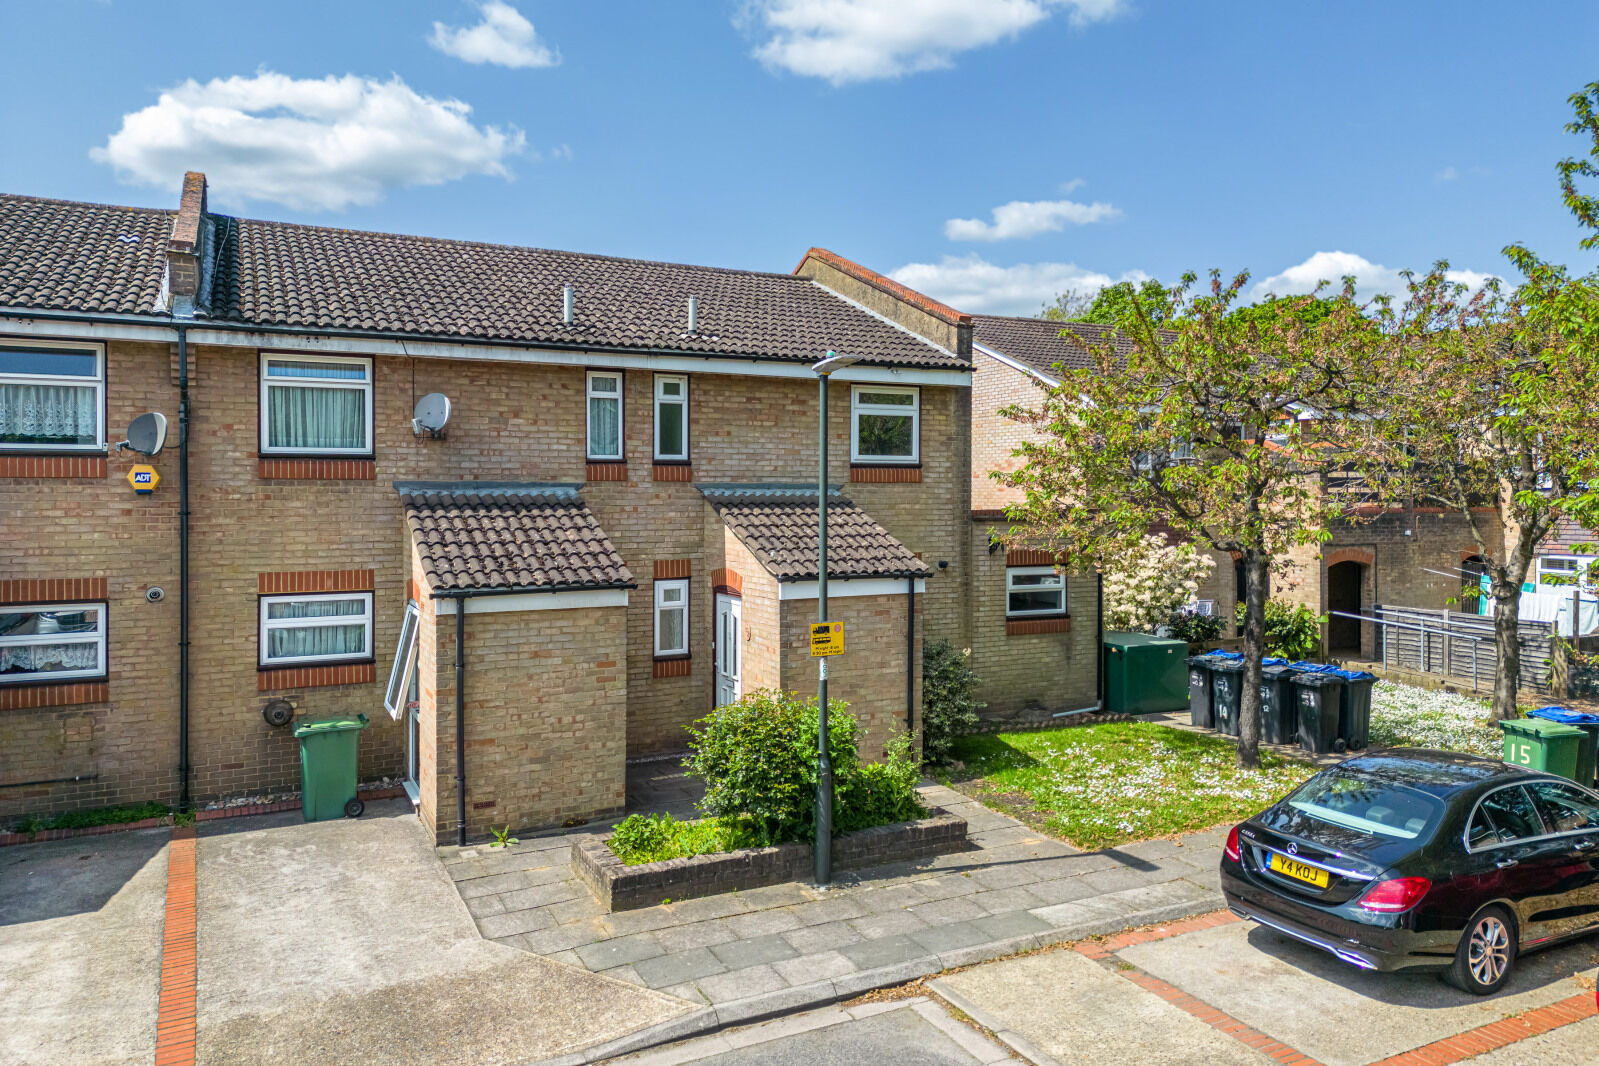 4 bedroom mid terraced house for sale Dennis Reeve Close, Mitcham, CR4, main image